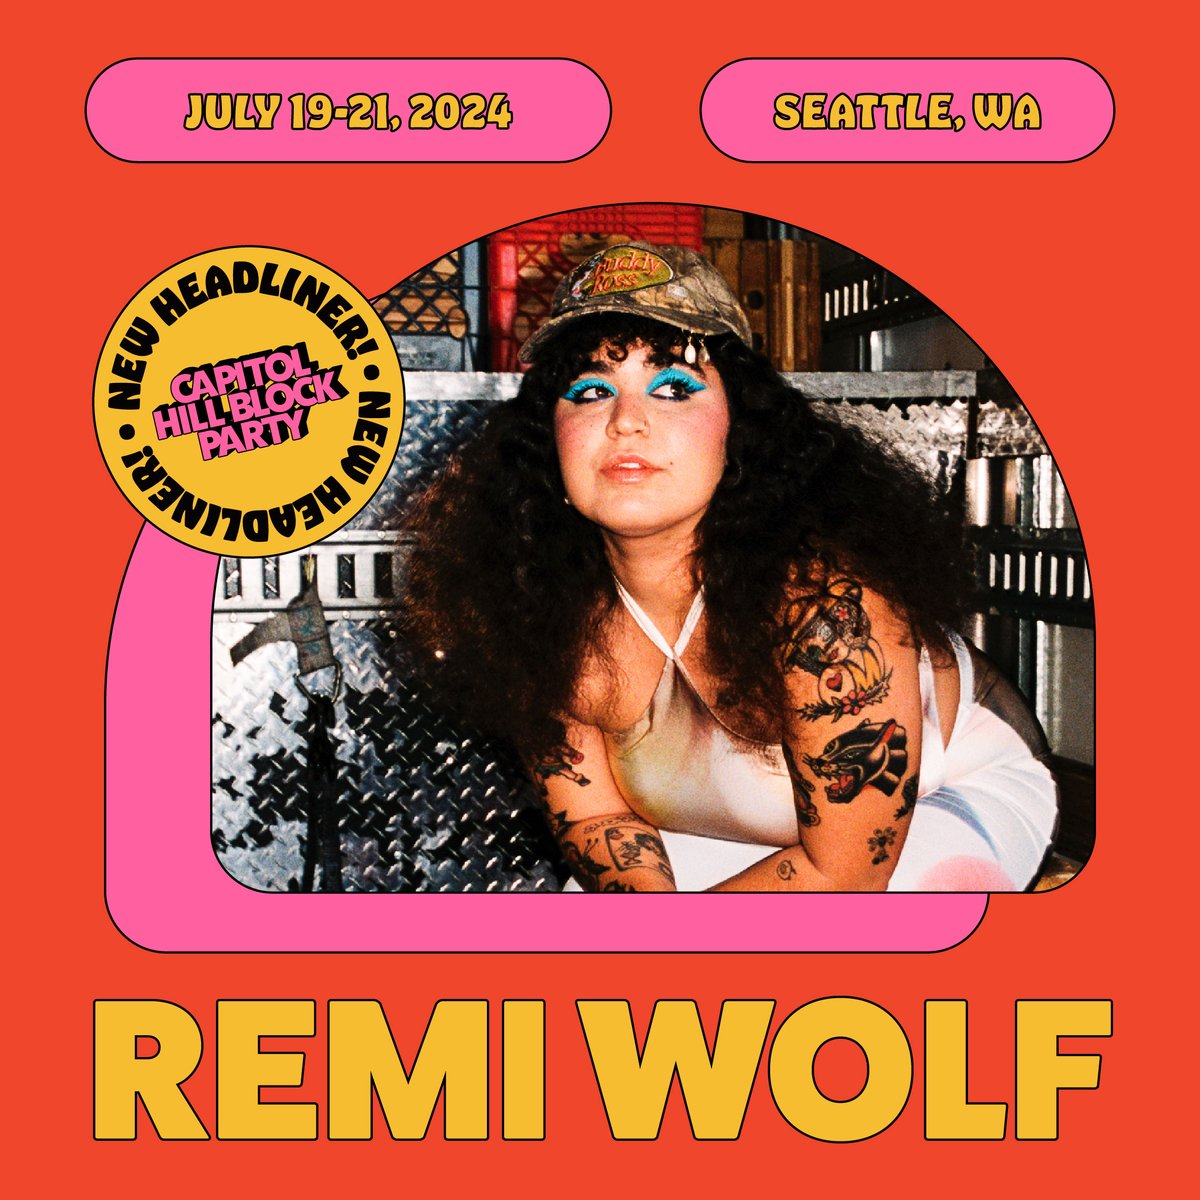 please have your Photo ID ready. 🪪 Please welcome the one and only @remiwolf to the 2024 lineup! Hear the brand new album LIVE just one week after its release. ☀️ 3-day passes are on sale now. wl.seetickets.us/event/Capitol-…